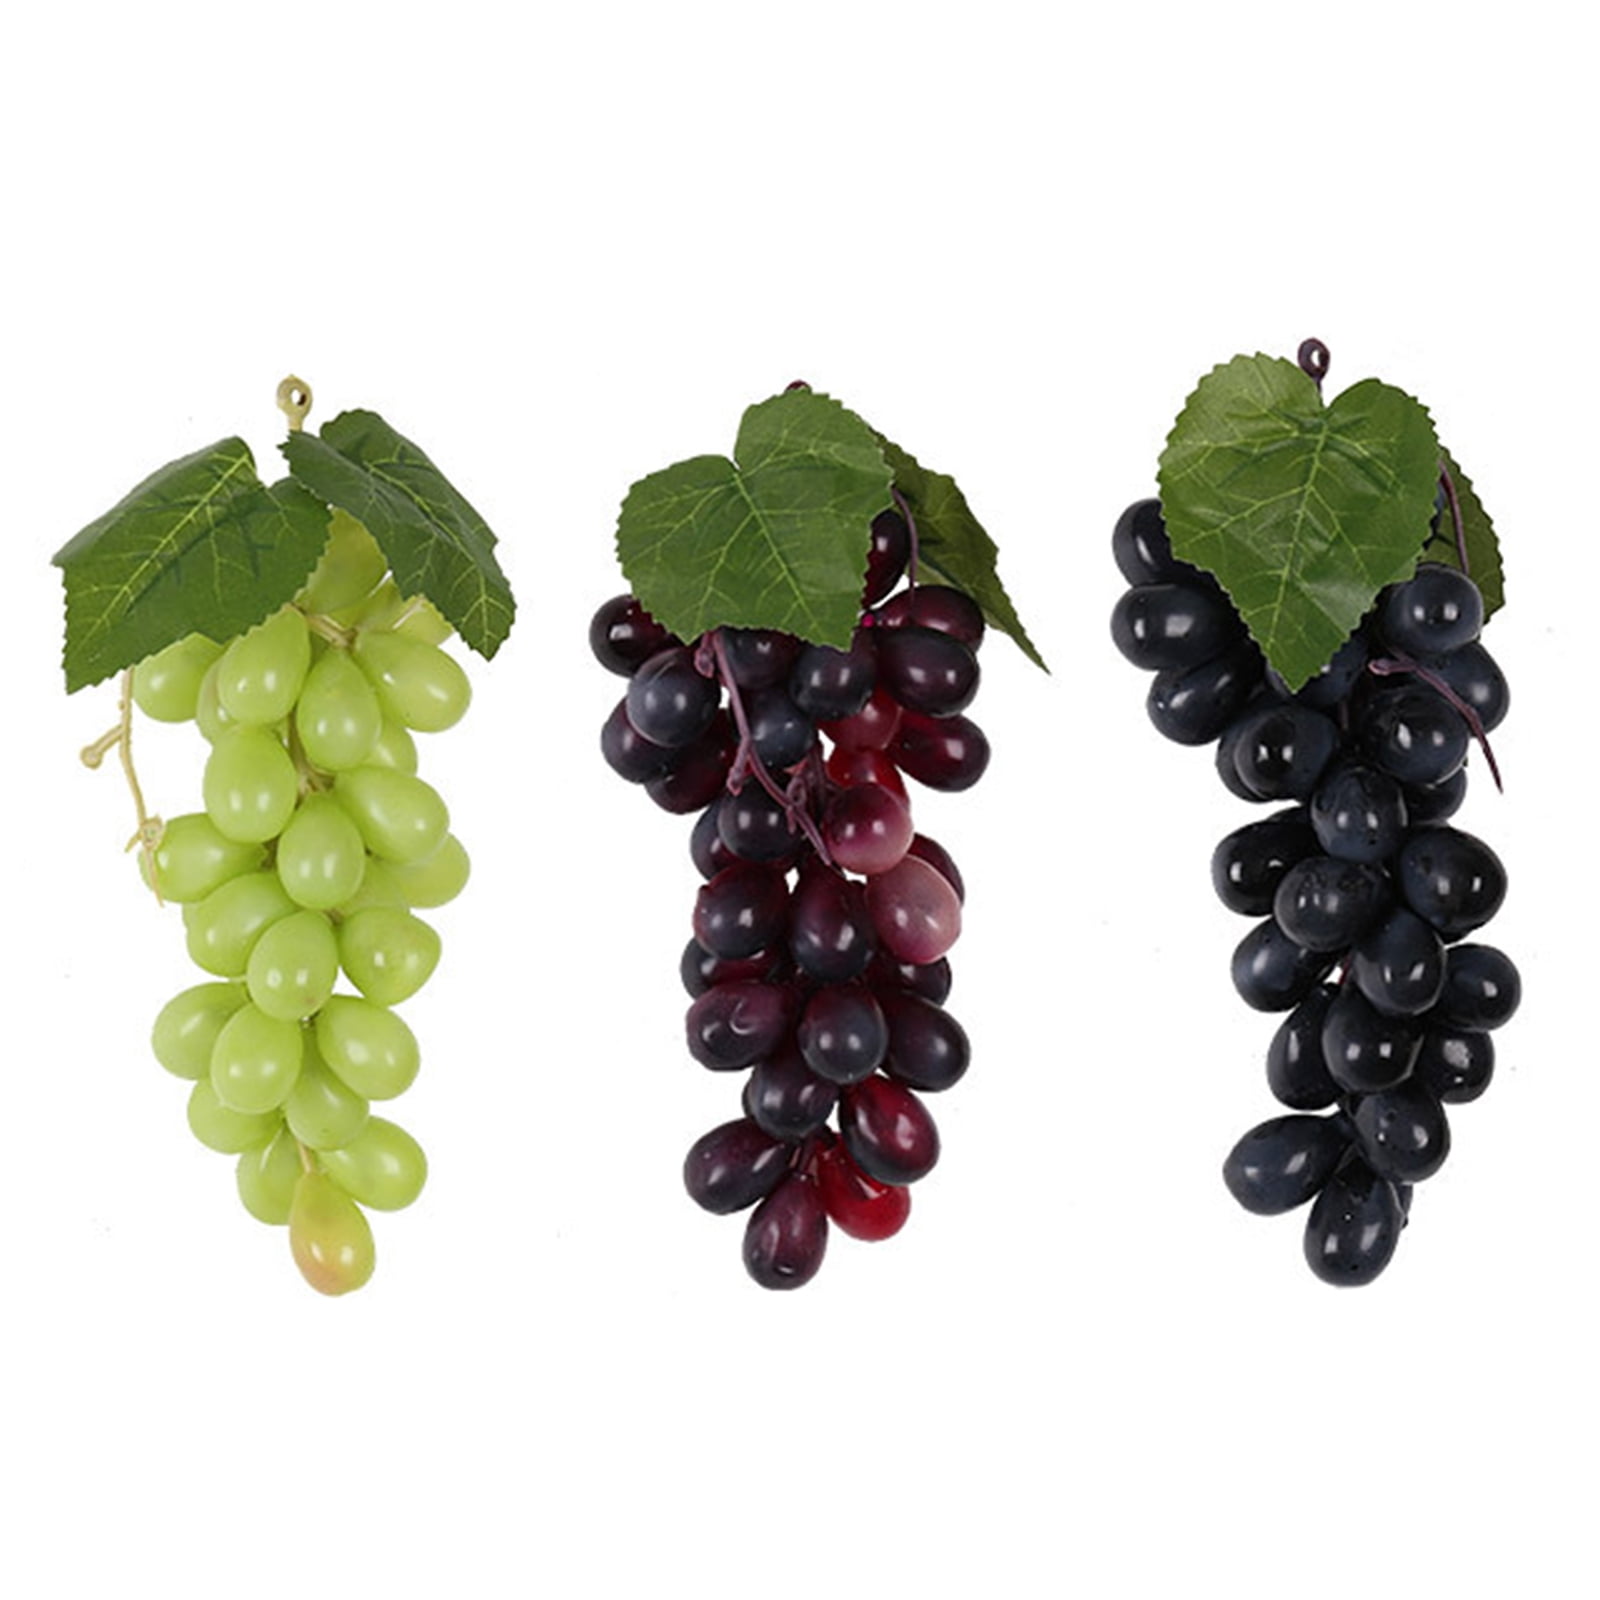 Simulation Party Fruit Plastic Home Garden Decor Bunch Of Grapes Wedding 